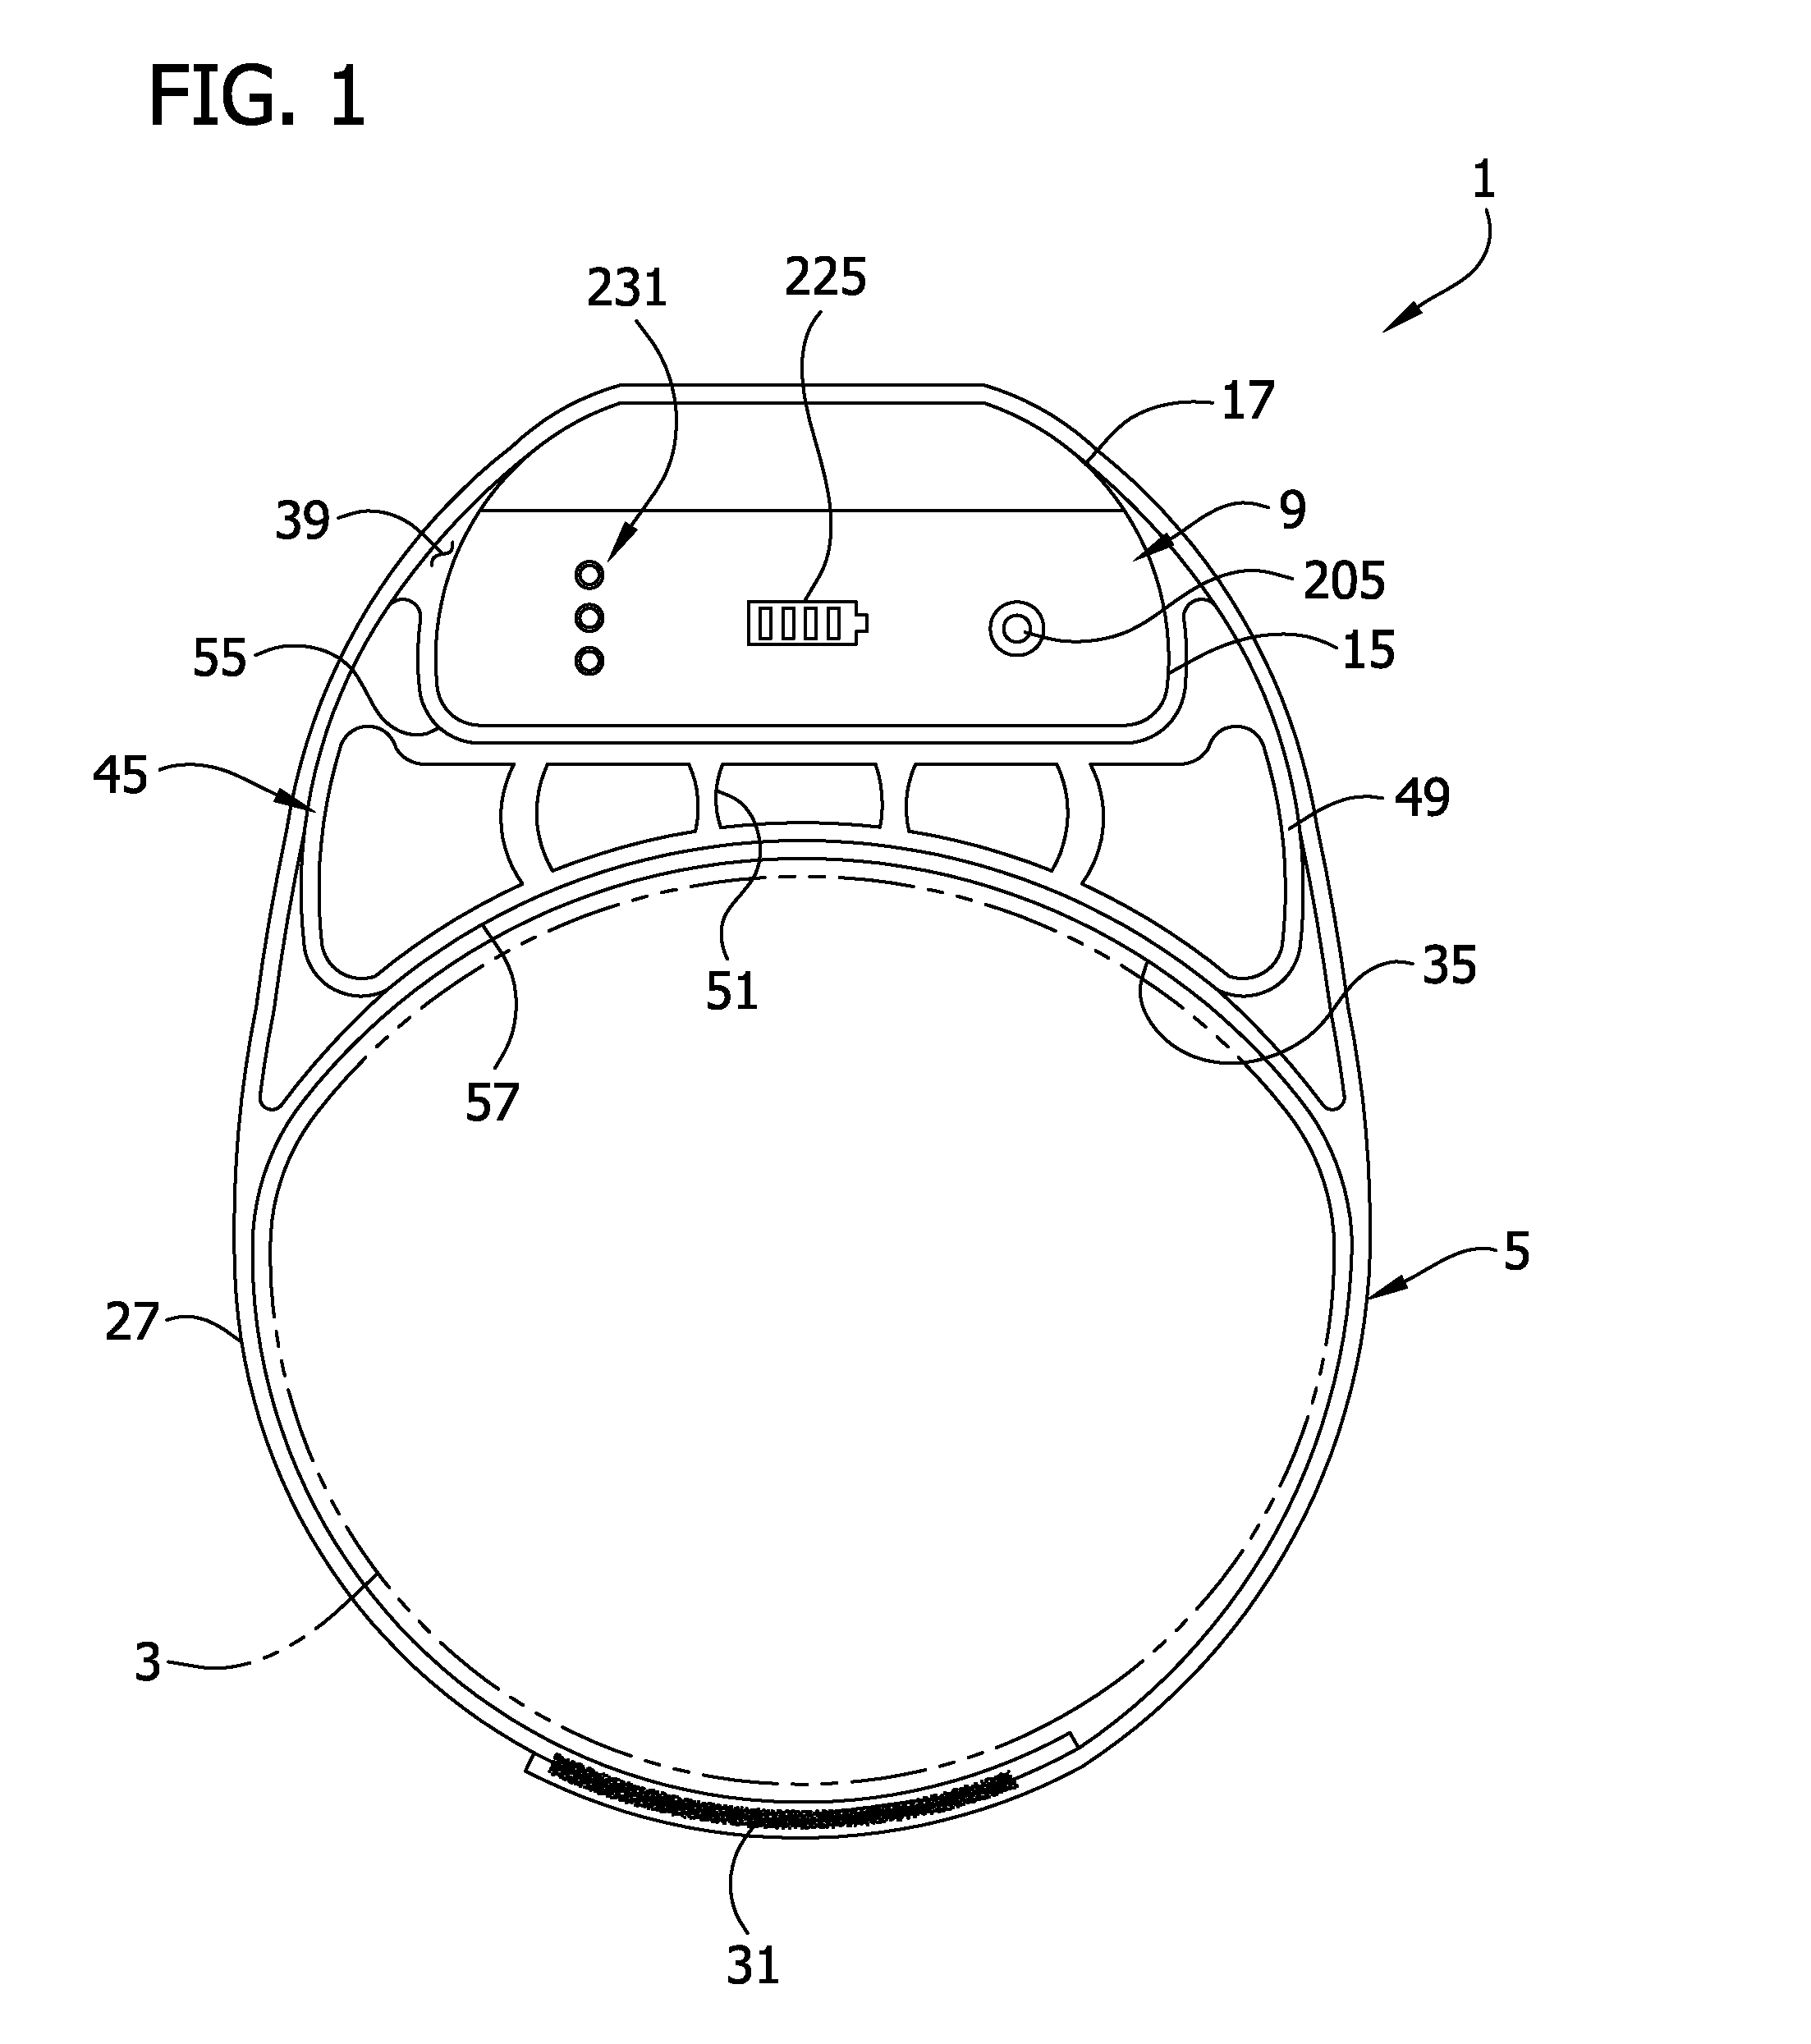 Compression Device, System and Method of Use